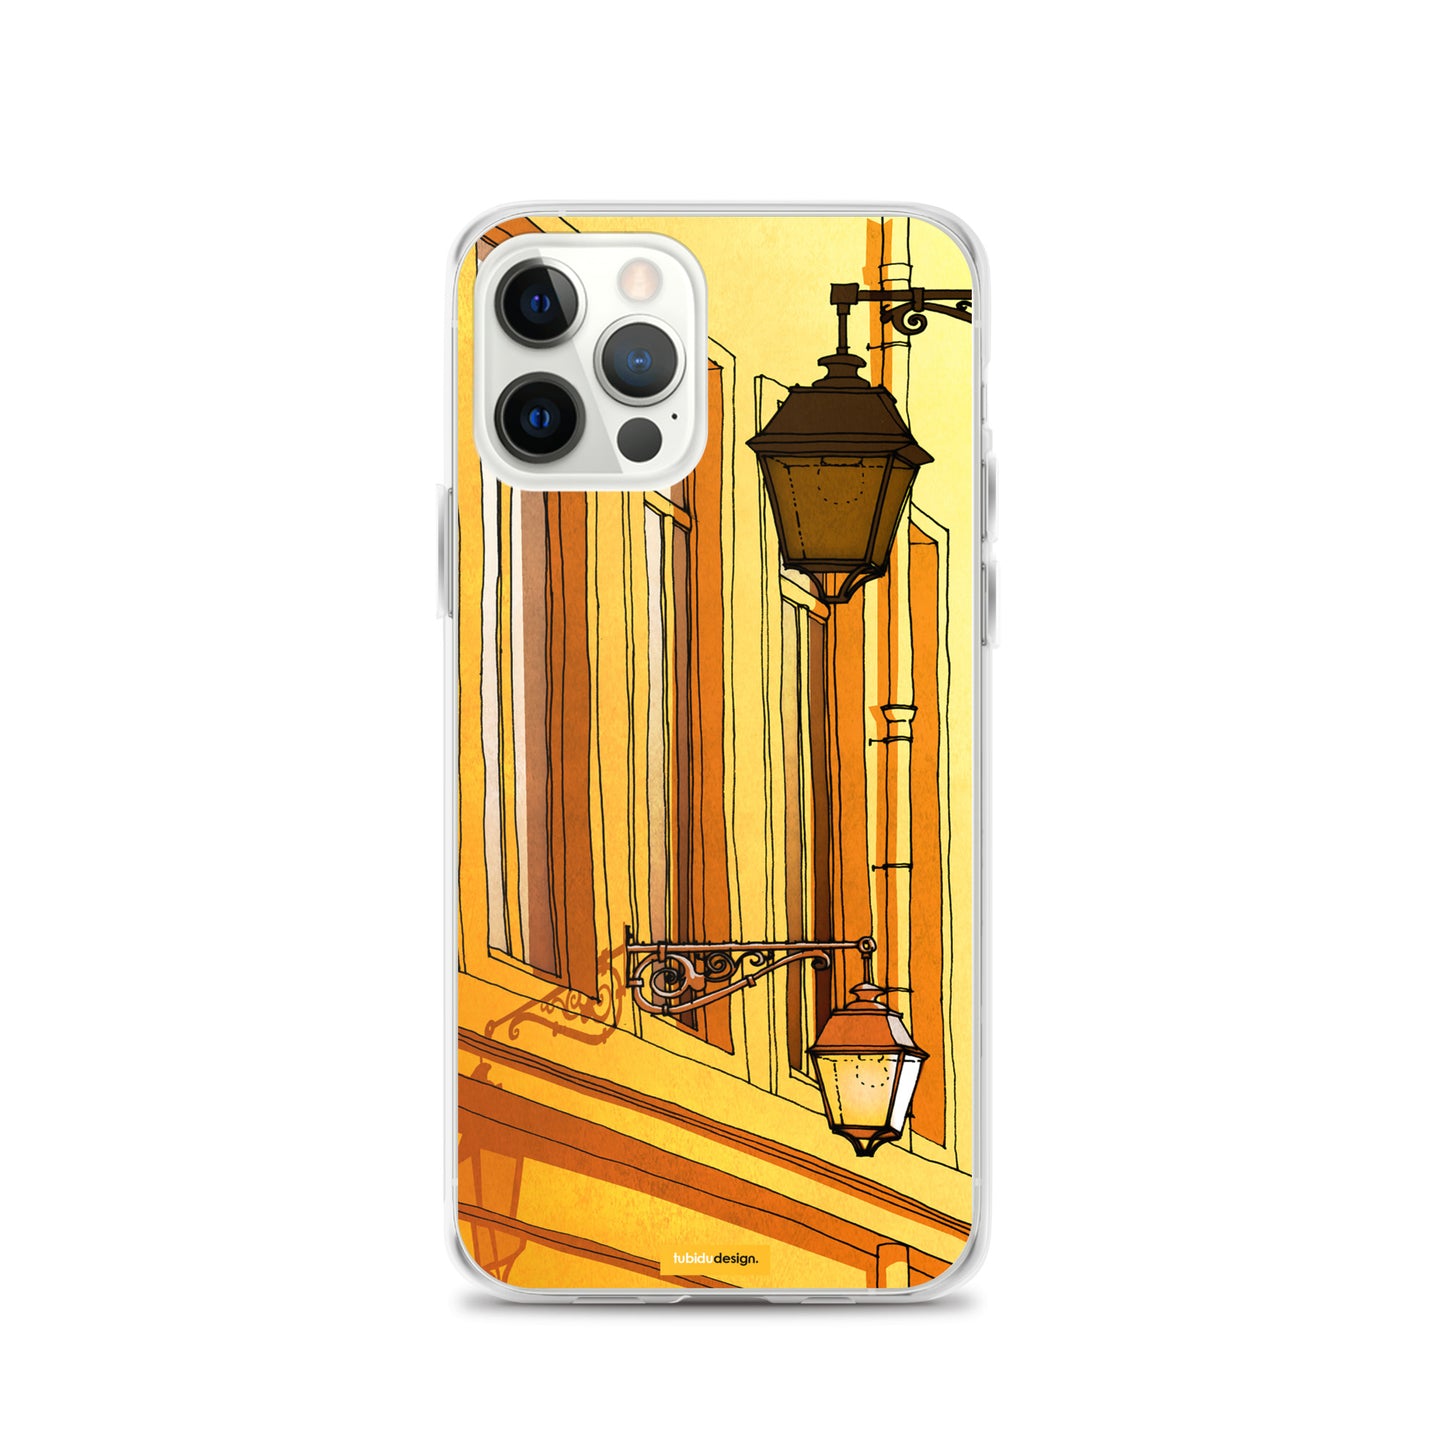 Backlight - Illustrated iPhone Case